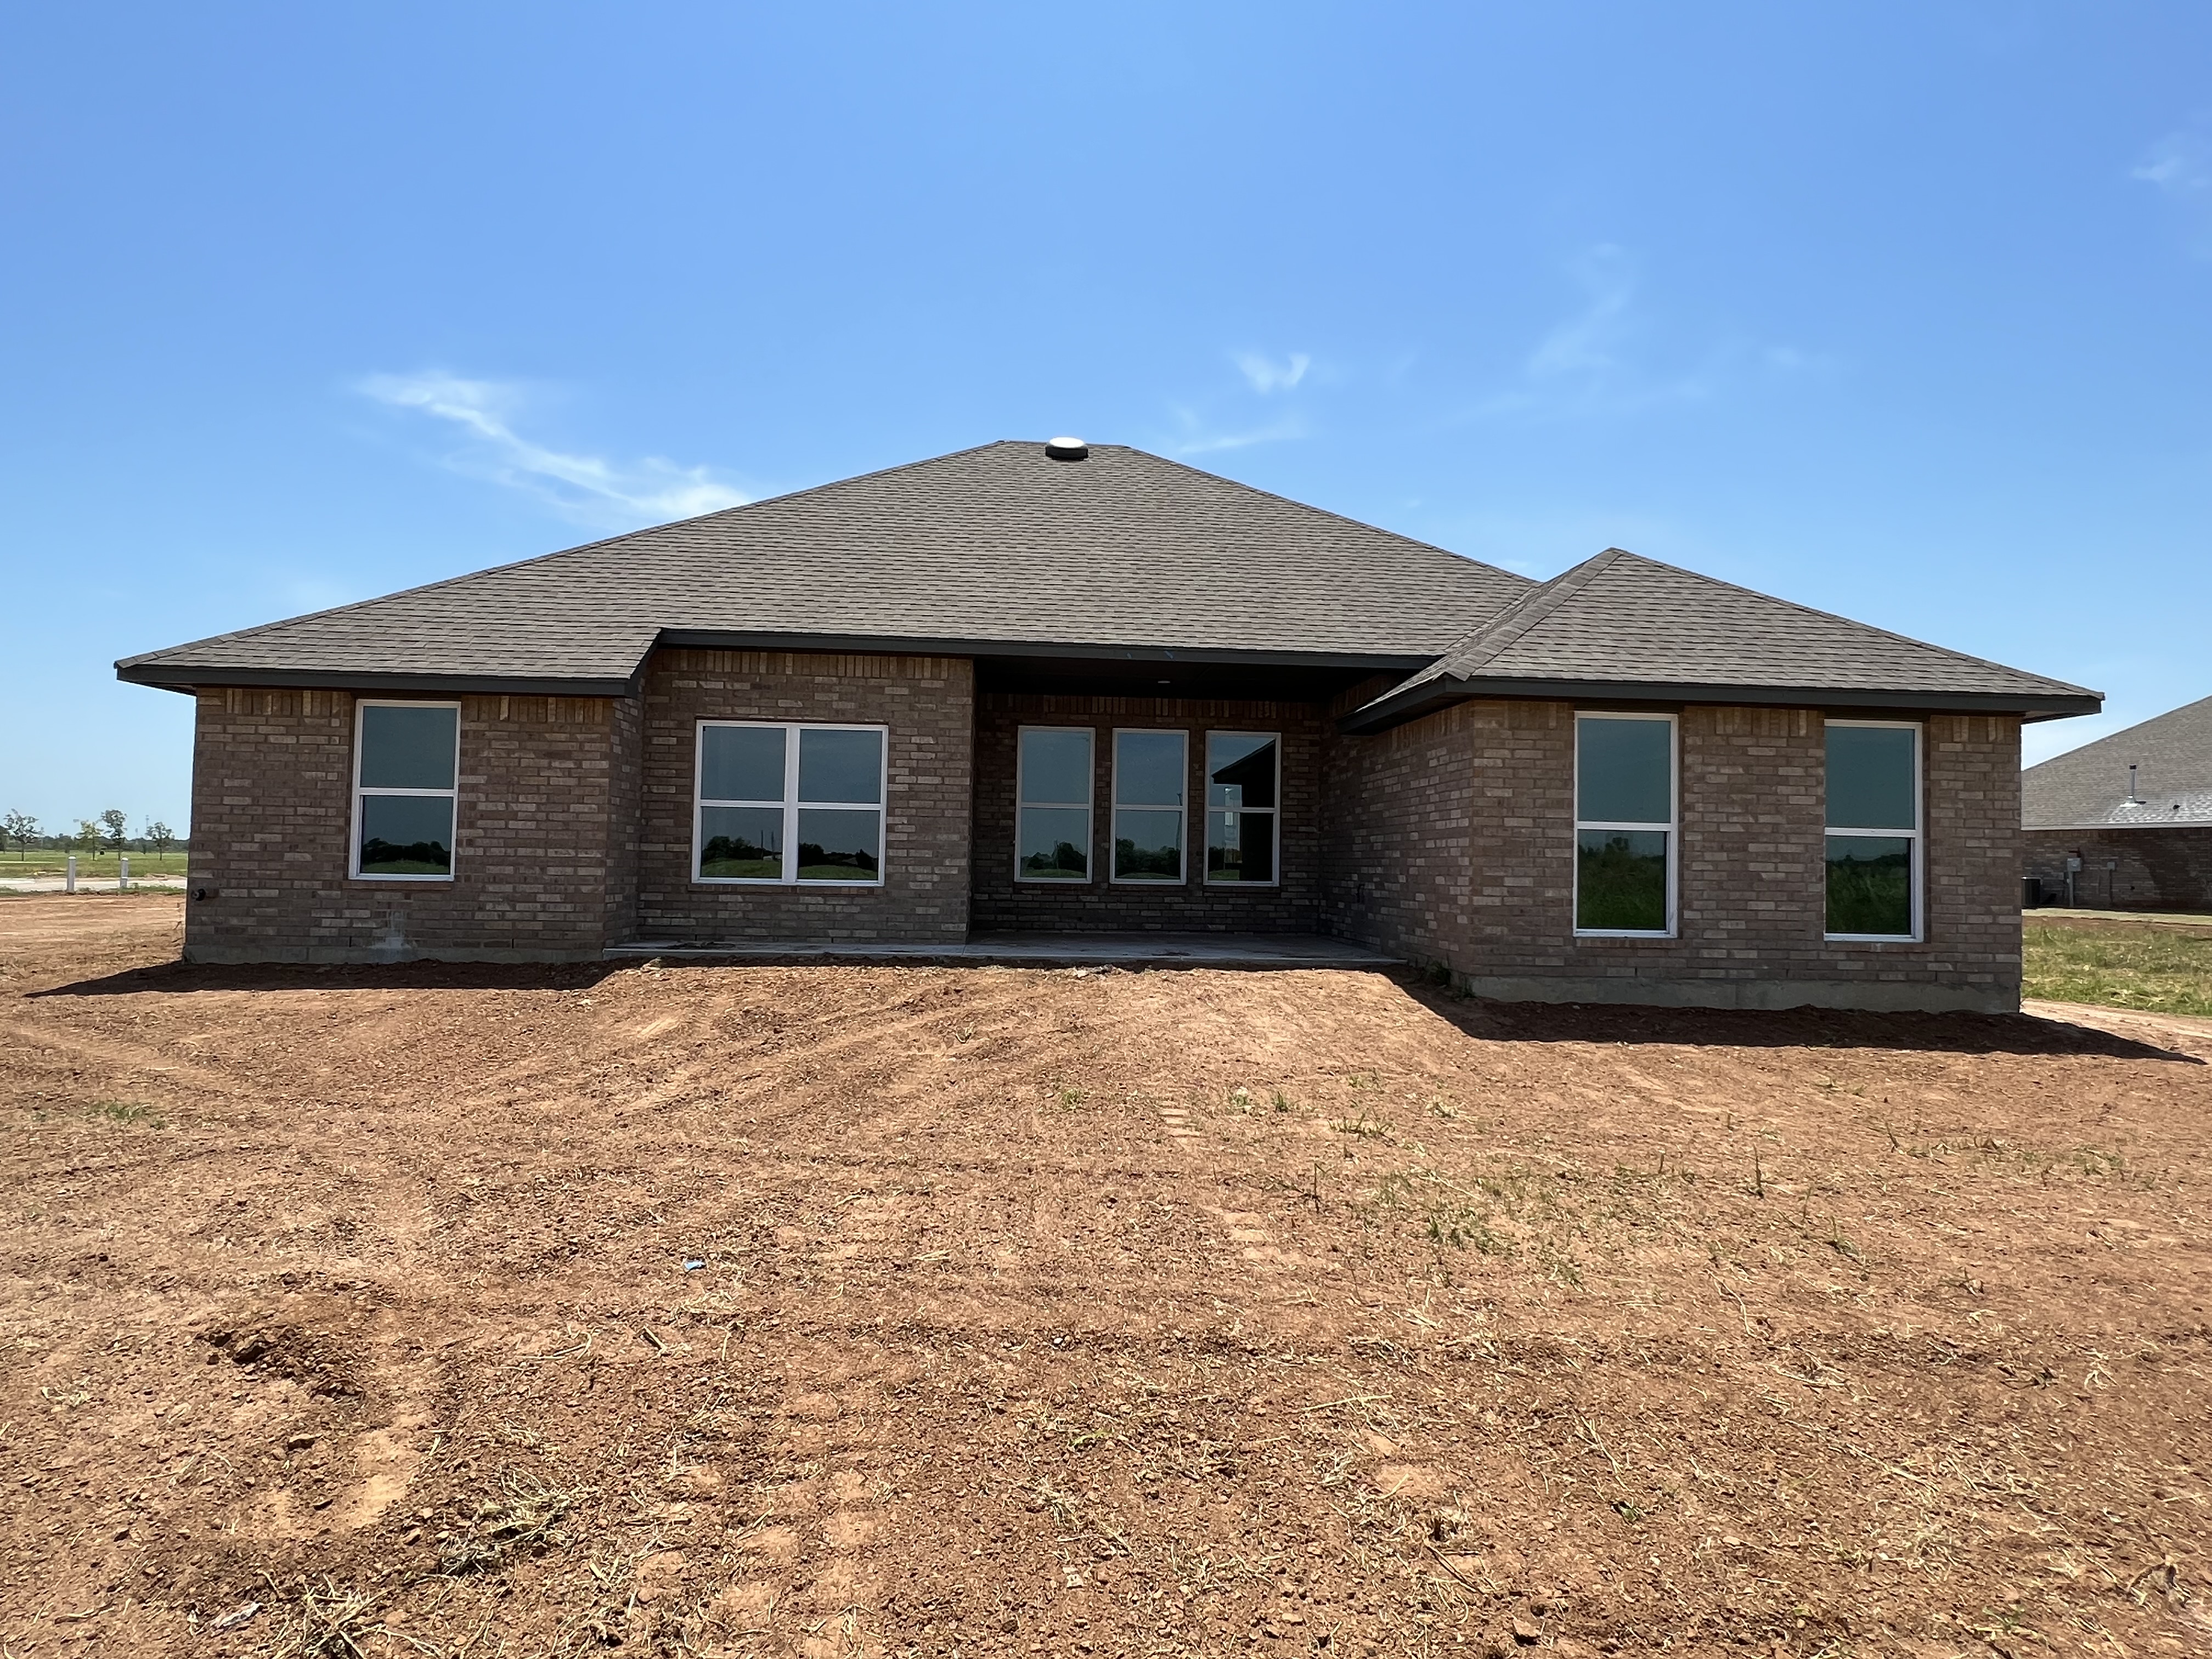 NW 12th Street, Newcastle, Oklahoma 73065, 4 Bedrooms Bedrooms, ,2 BathroomsBathrooms,House,For Sale,NW 12th Street,1389